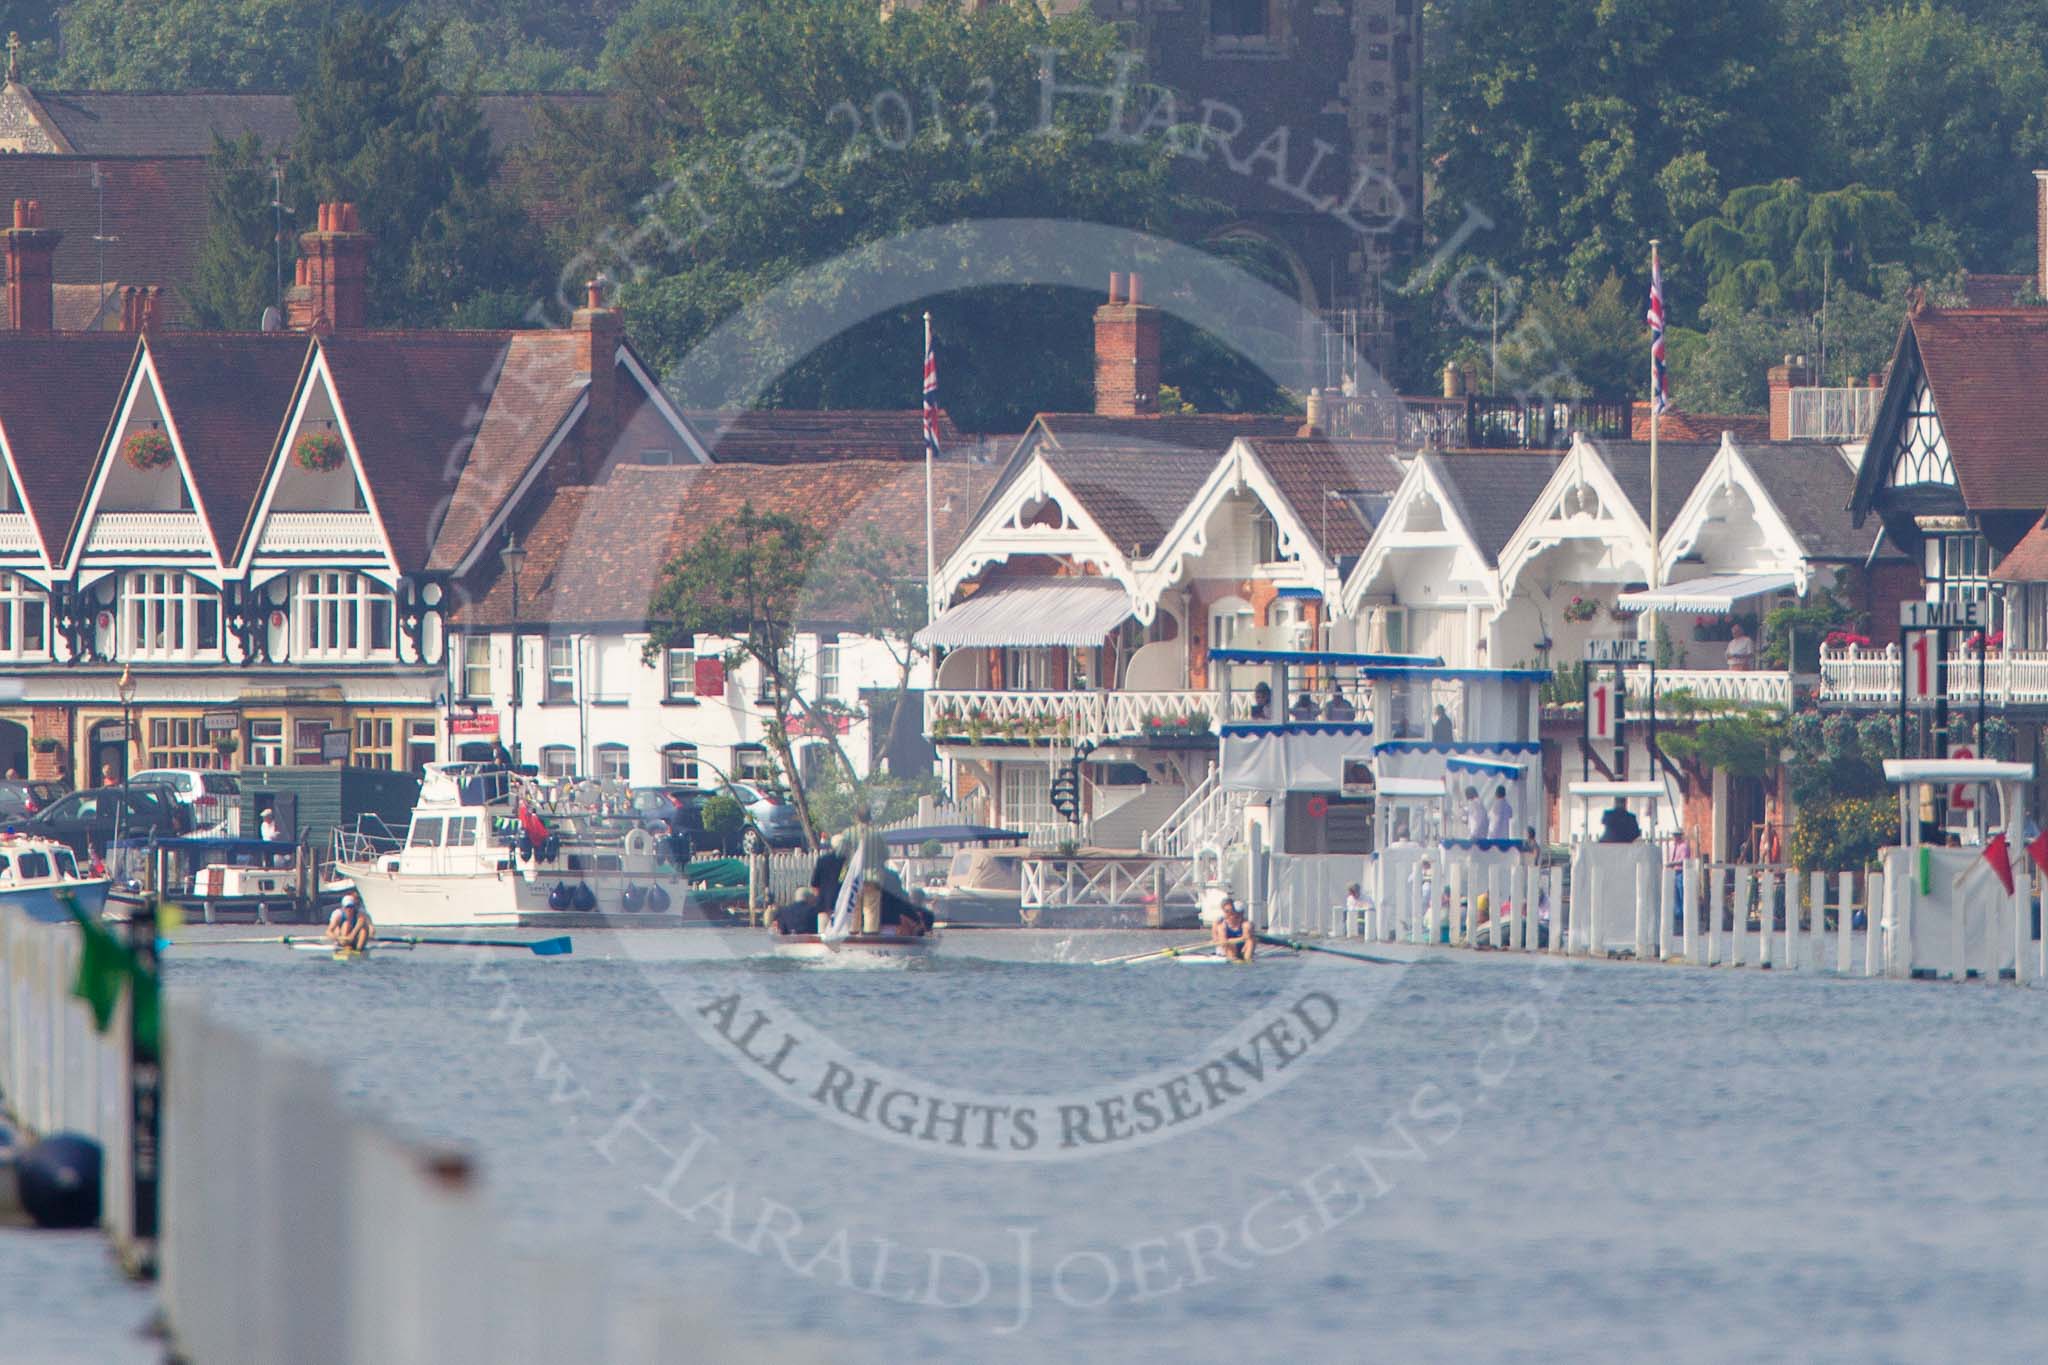 Henley Royal Regatta 2013, Saturday: The first of the Saturday races. For the Britannia Challenge Cup - RTHC Bayer Leverkusen, Germany, and Taurus Boat Club 'A' close to the finish line - Taurus to win with 1 3/4 length. Image #75, 06 July 2013 10:05 River Thames, Henley on Thames, UK